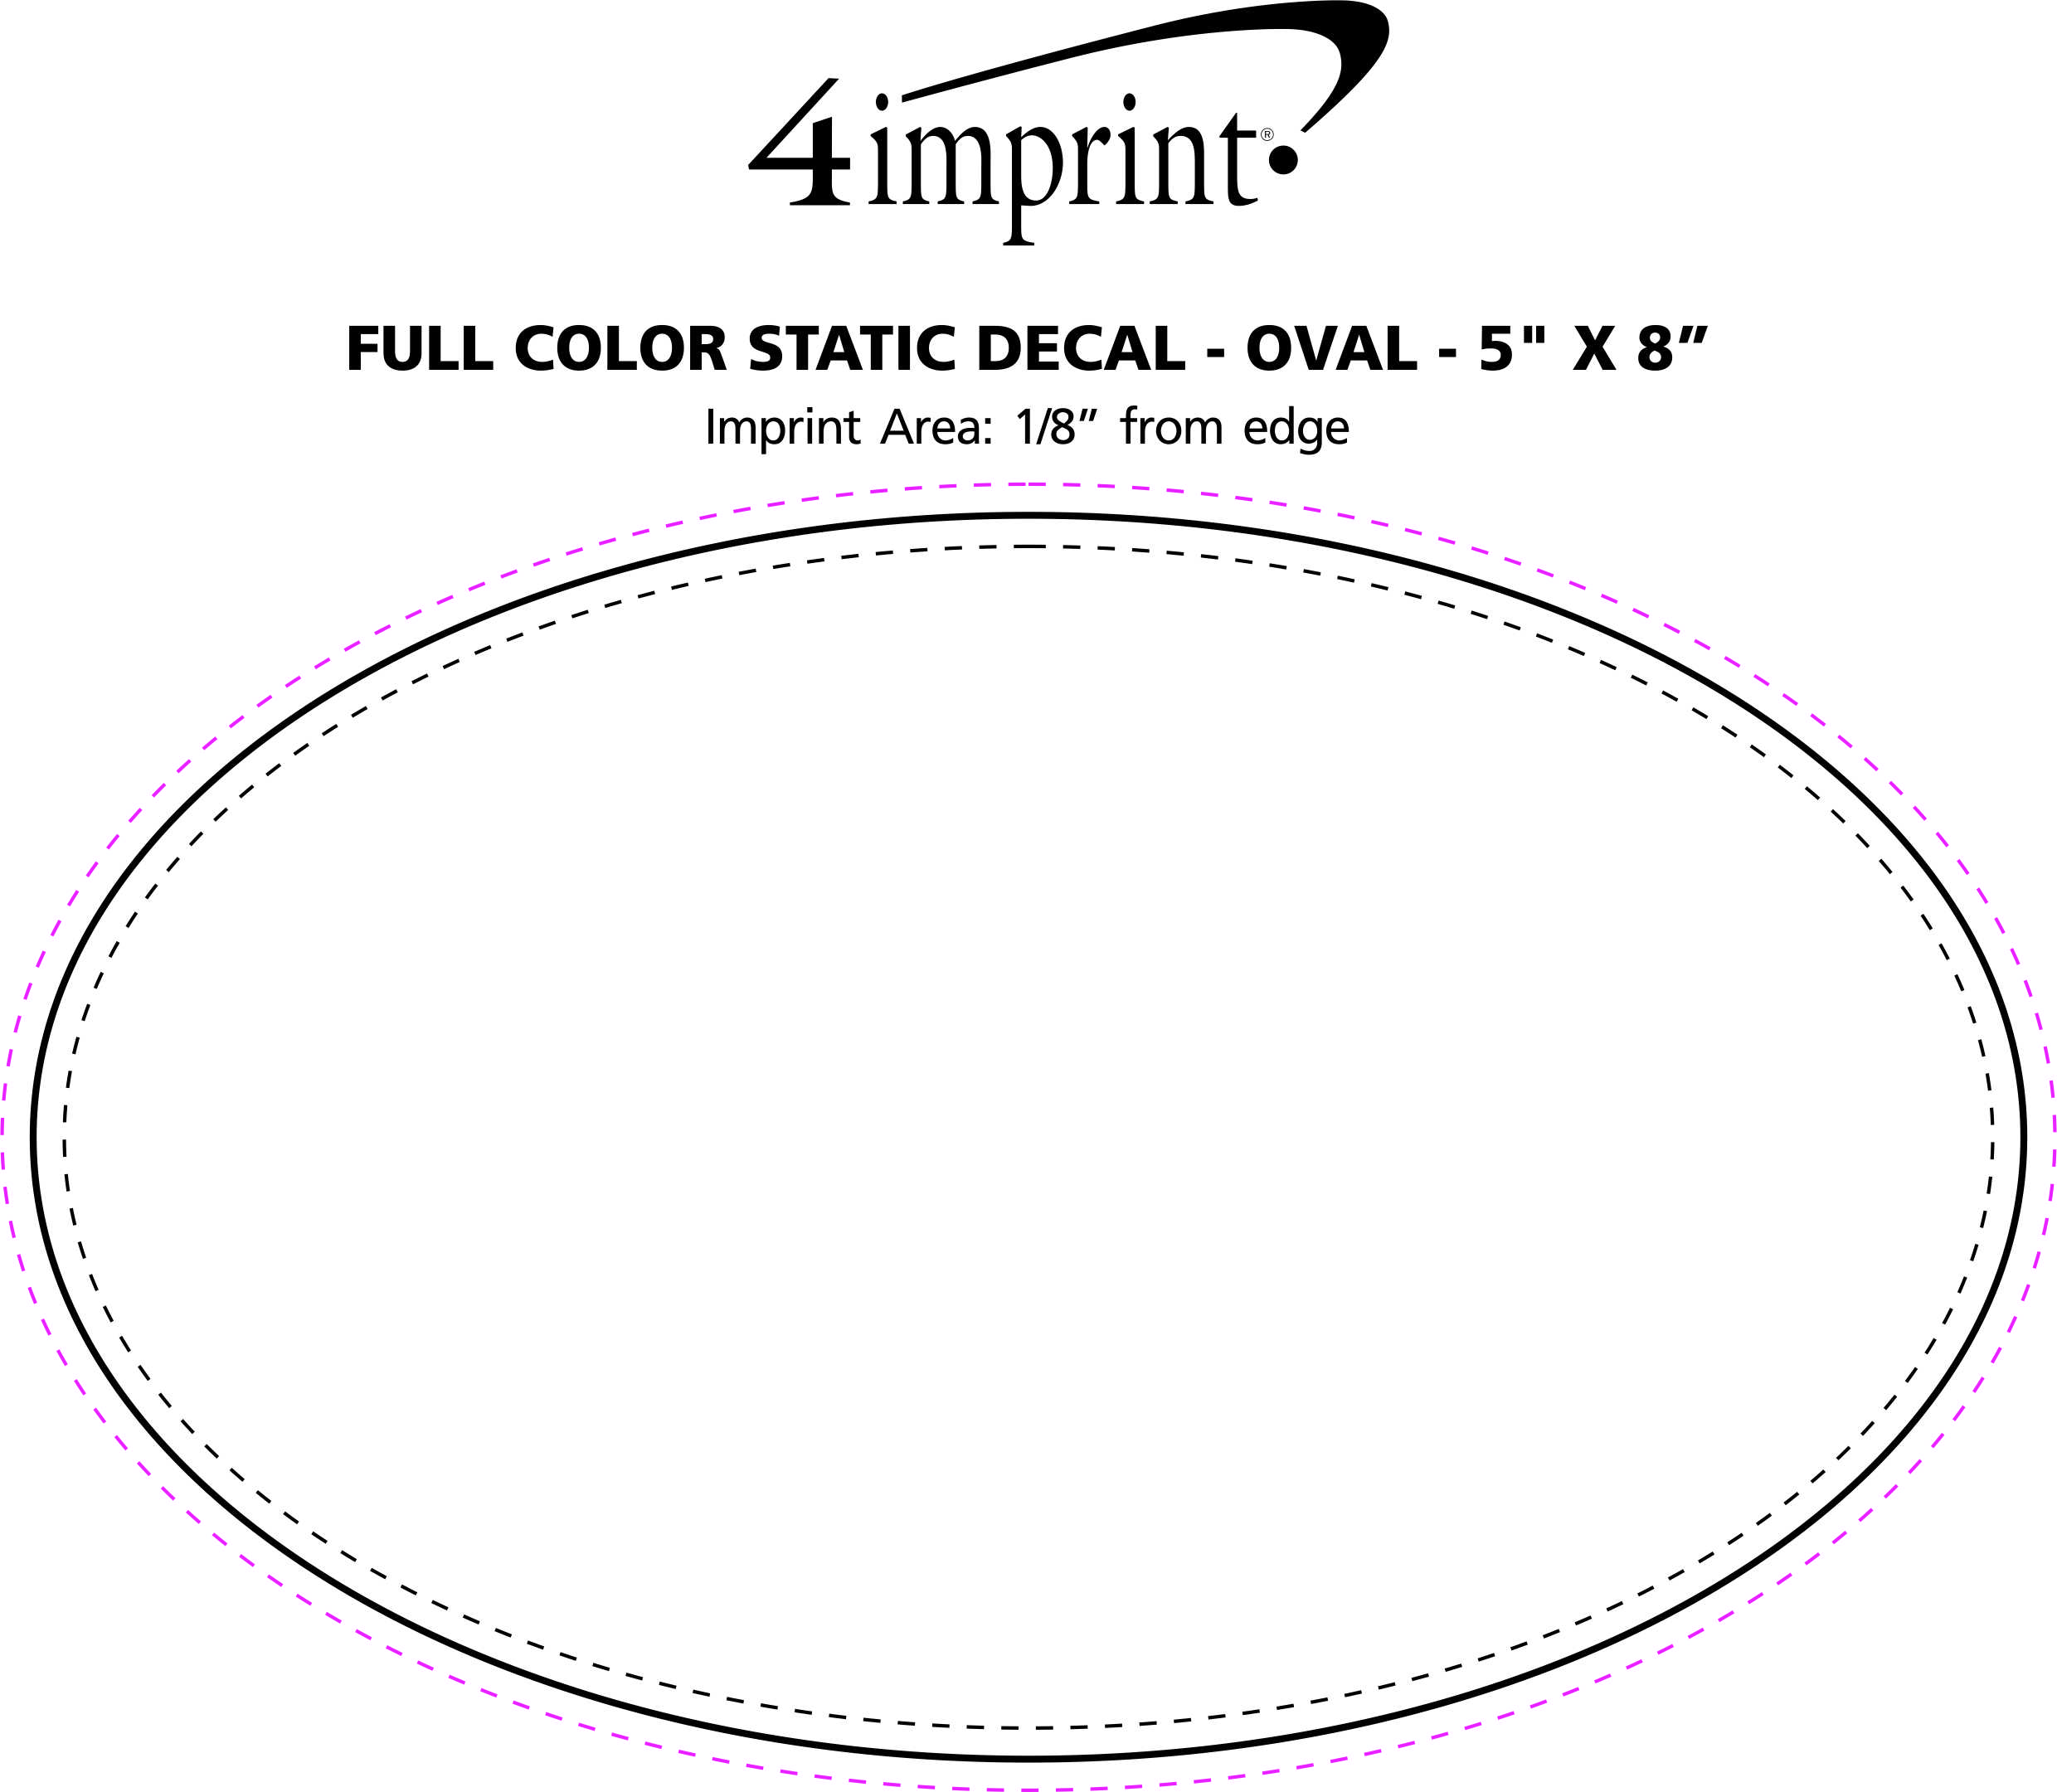 Imprint Area of Full Color Static Decal - Oval - 5" x 8"